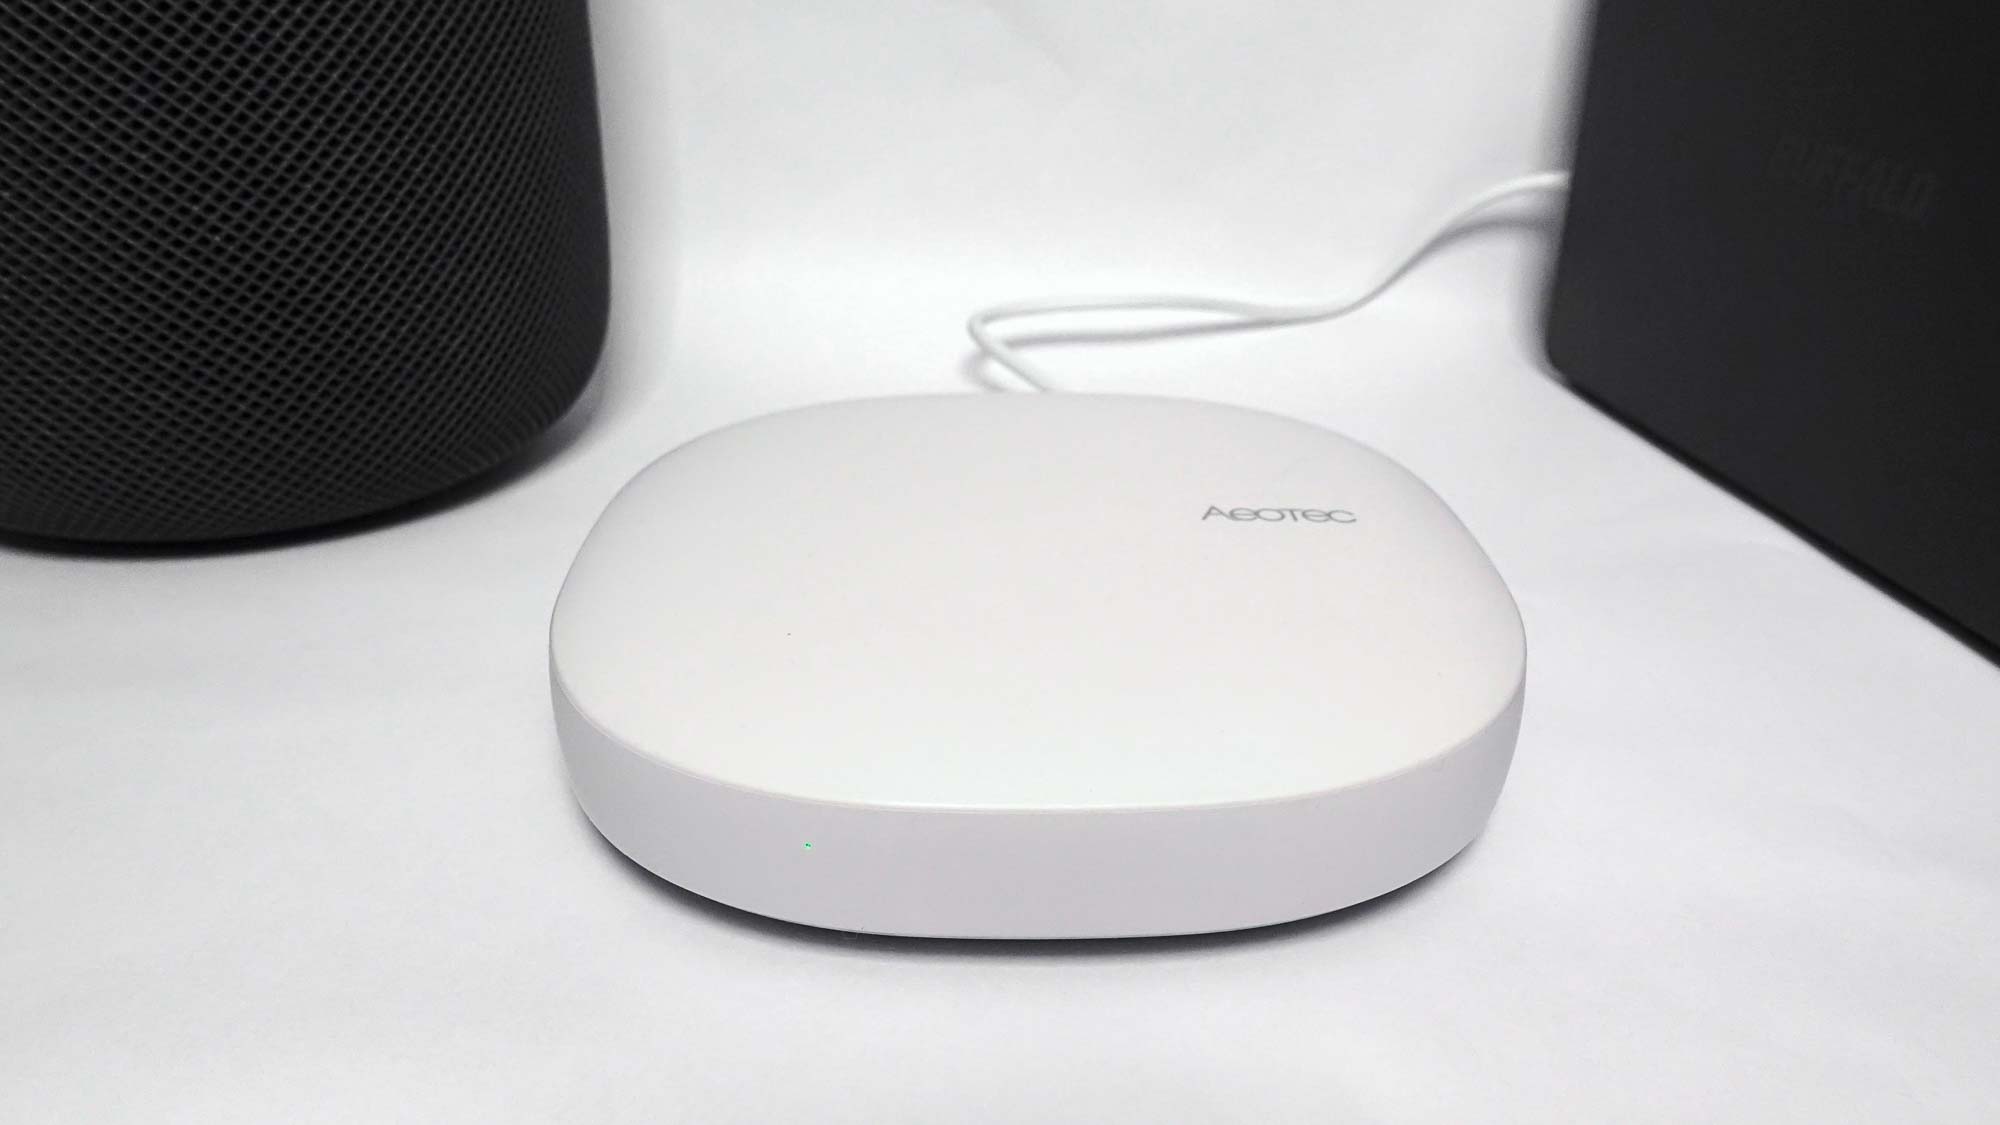 Front view of Aeotec Smart Home Hub